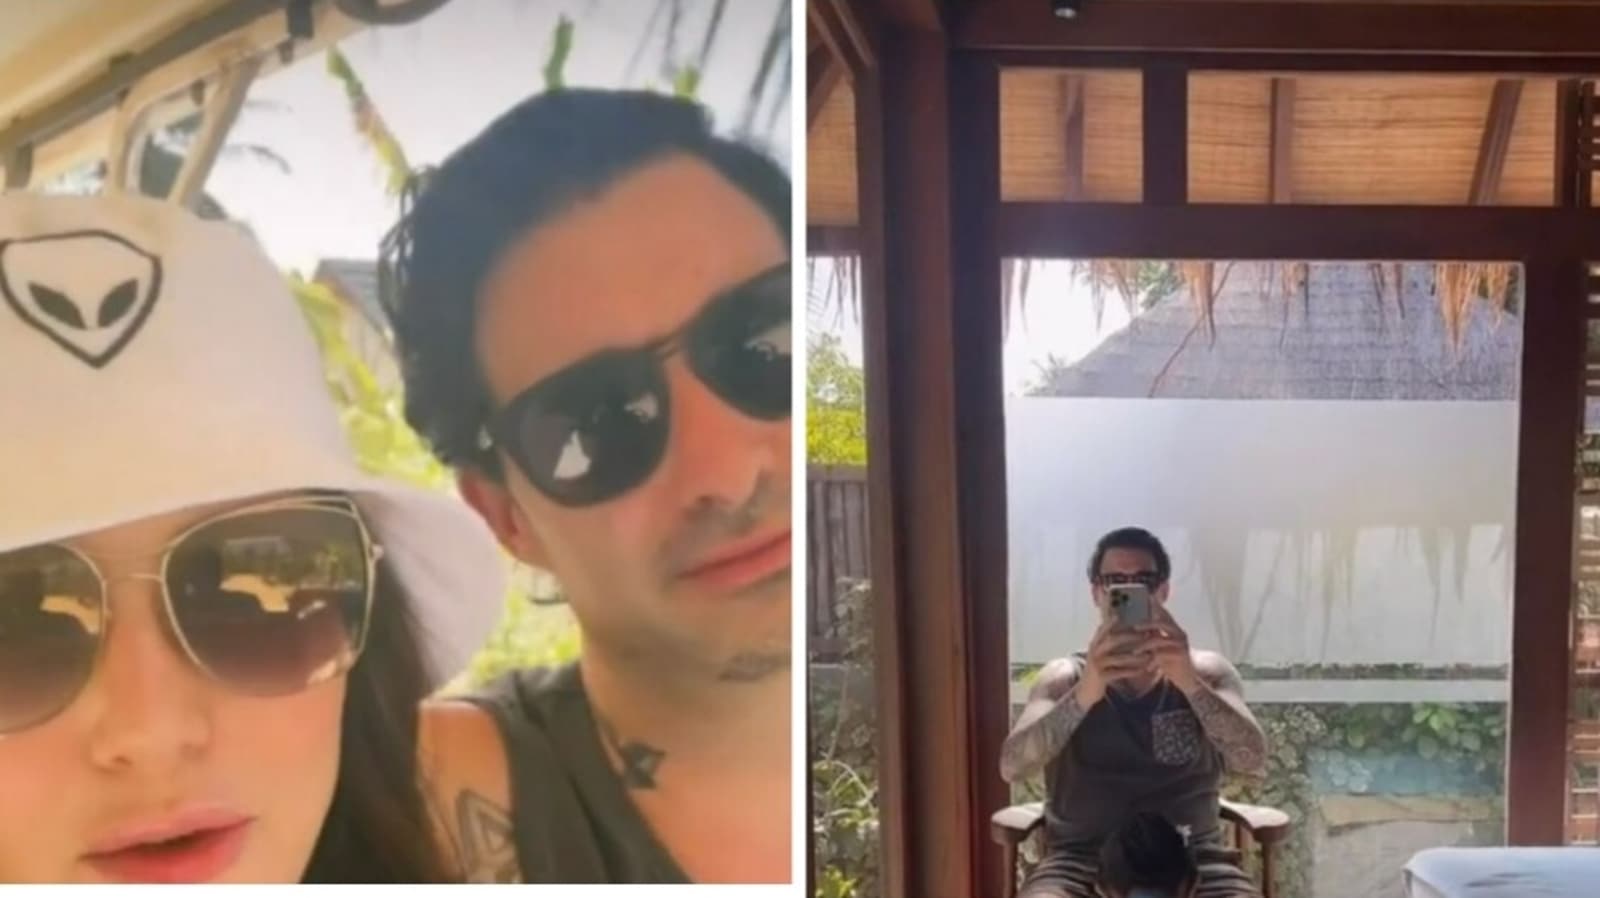 Xxx Video 16 Saal Beeg - Sunny Leone and Daniel Weber chill together at Maldives spa. Watch -  Hindustan Times